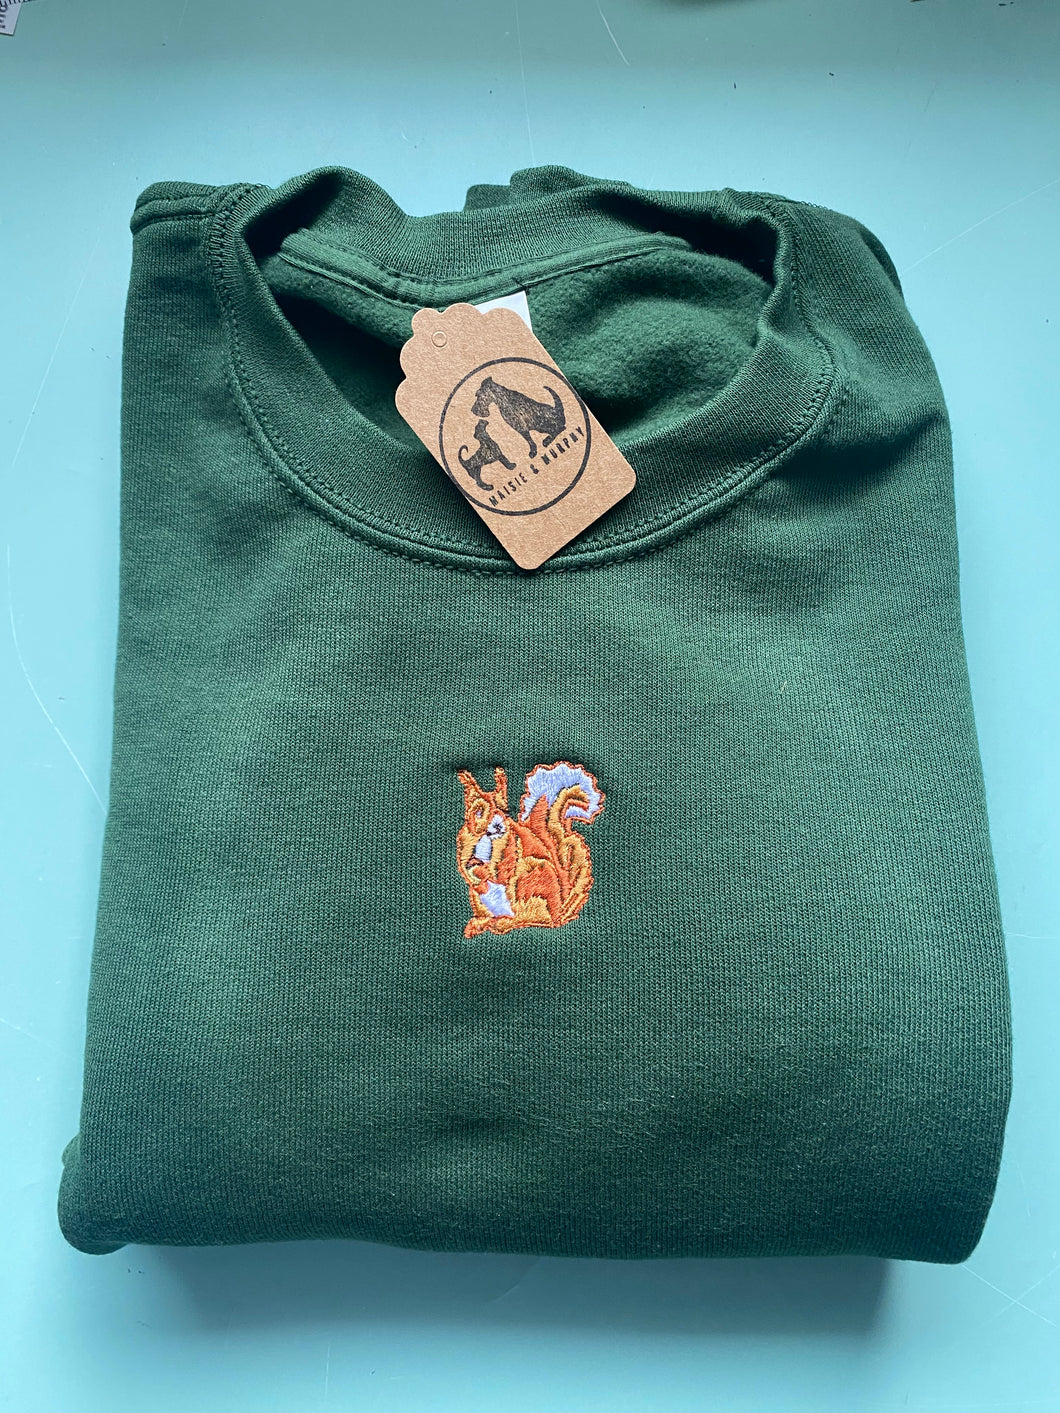 Red Squirrel Embroidered Sweatshirt - Squirrel lover gifts